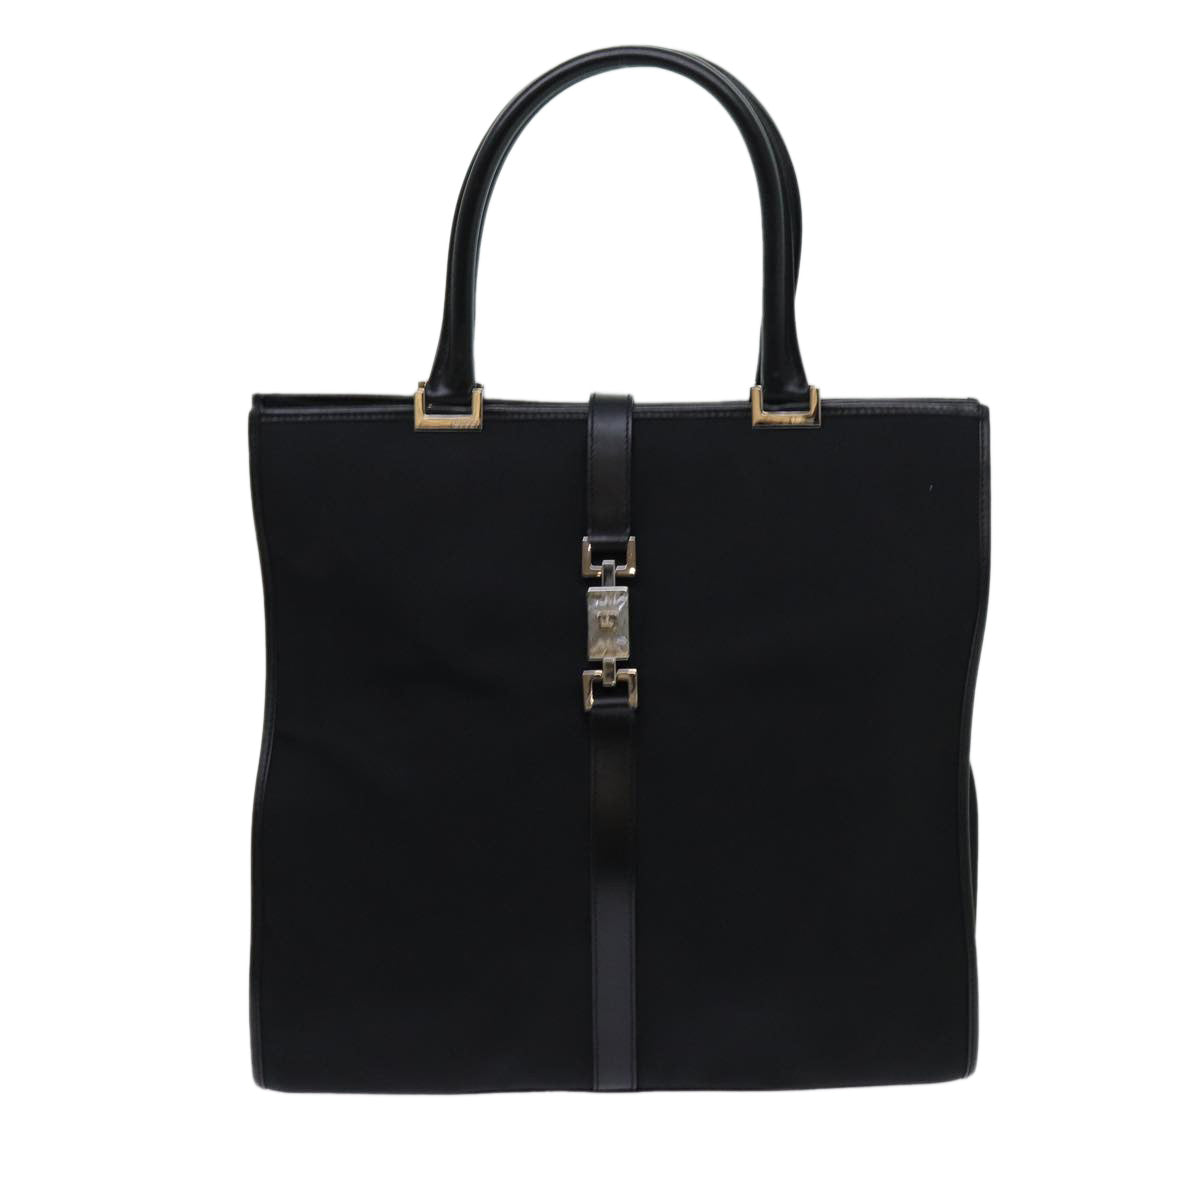 Gucci Jackie Black Synthetic Tote Bag ()